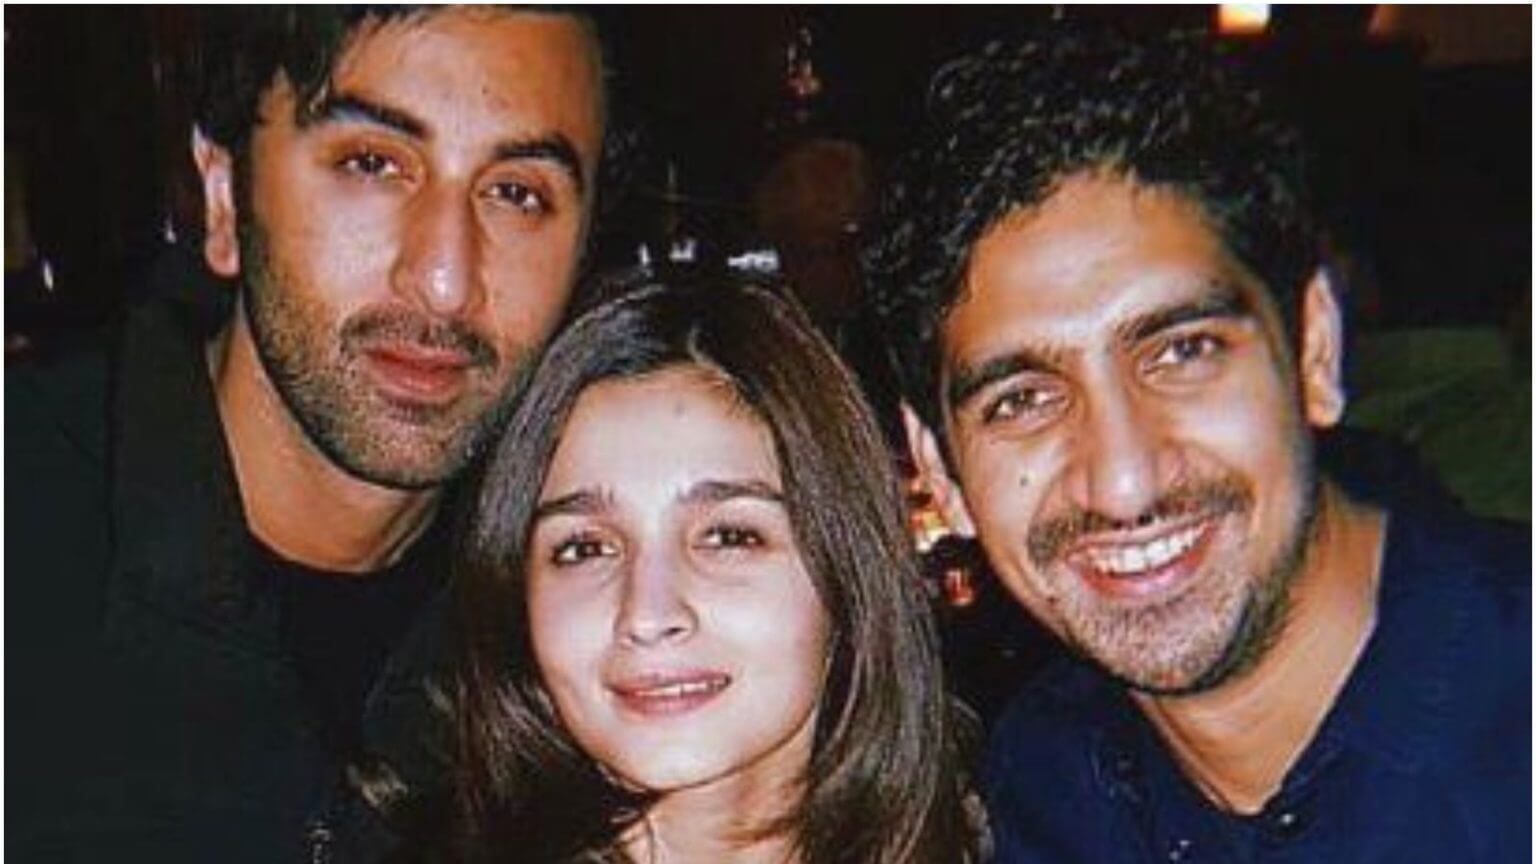 Brahmastra release date will be announced soon Ayan Mukerji share an emotional post